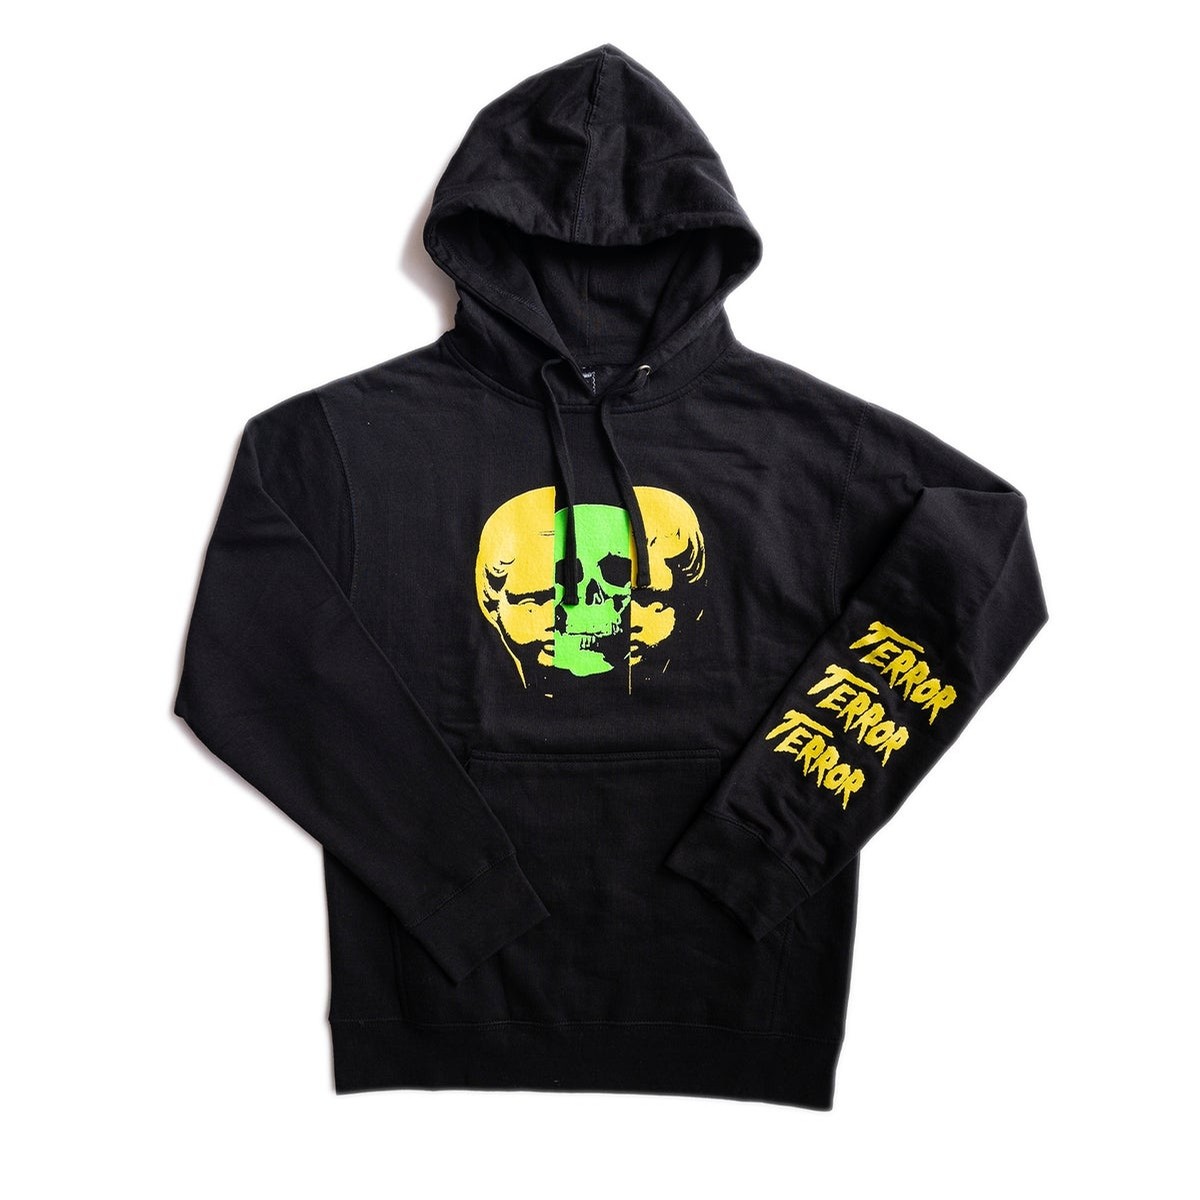 Hoodies – Conquer Divide